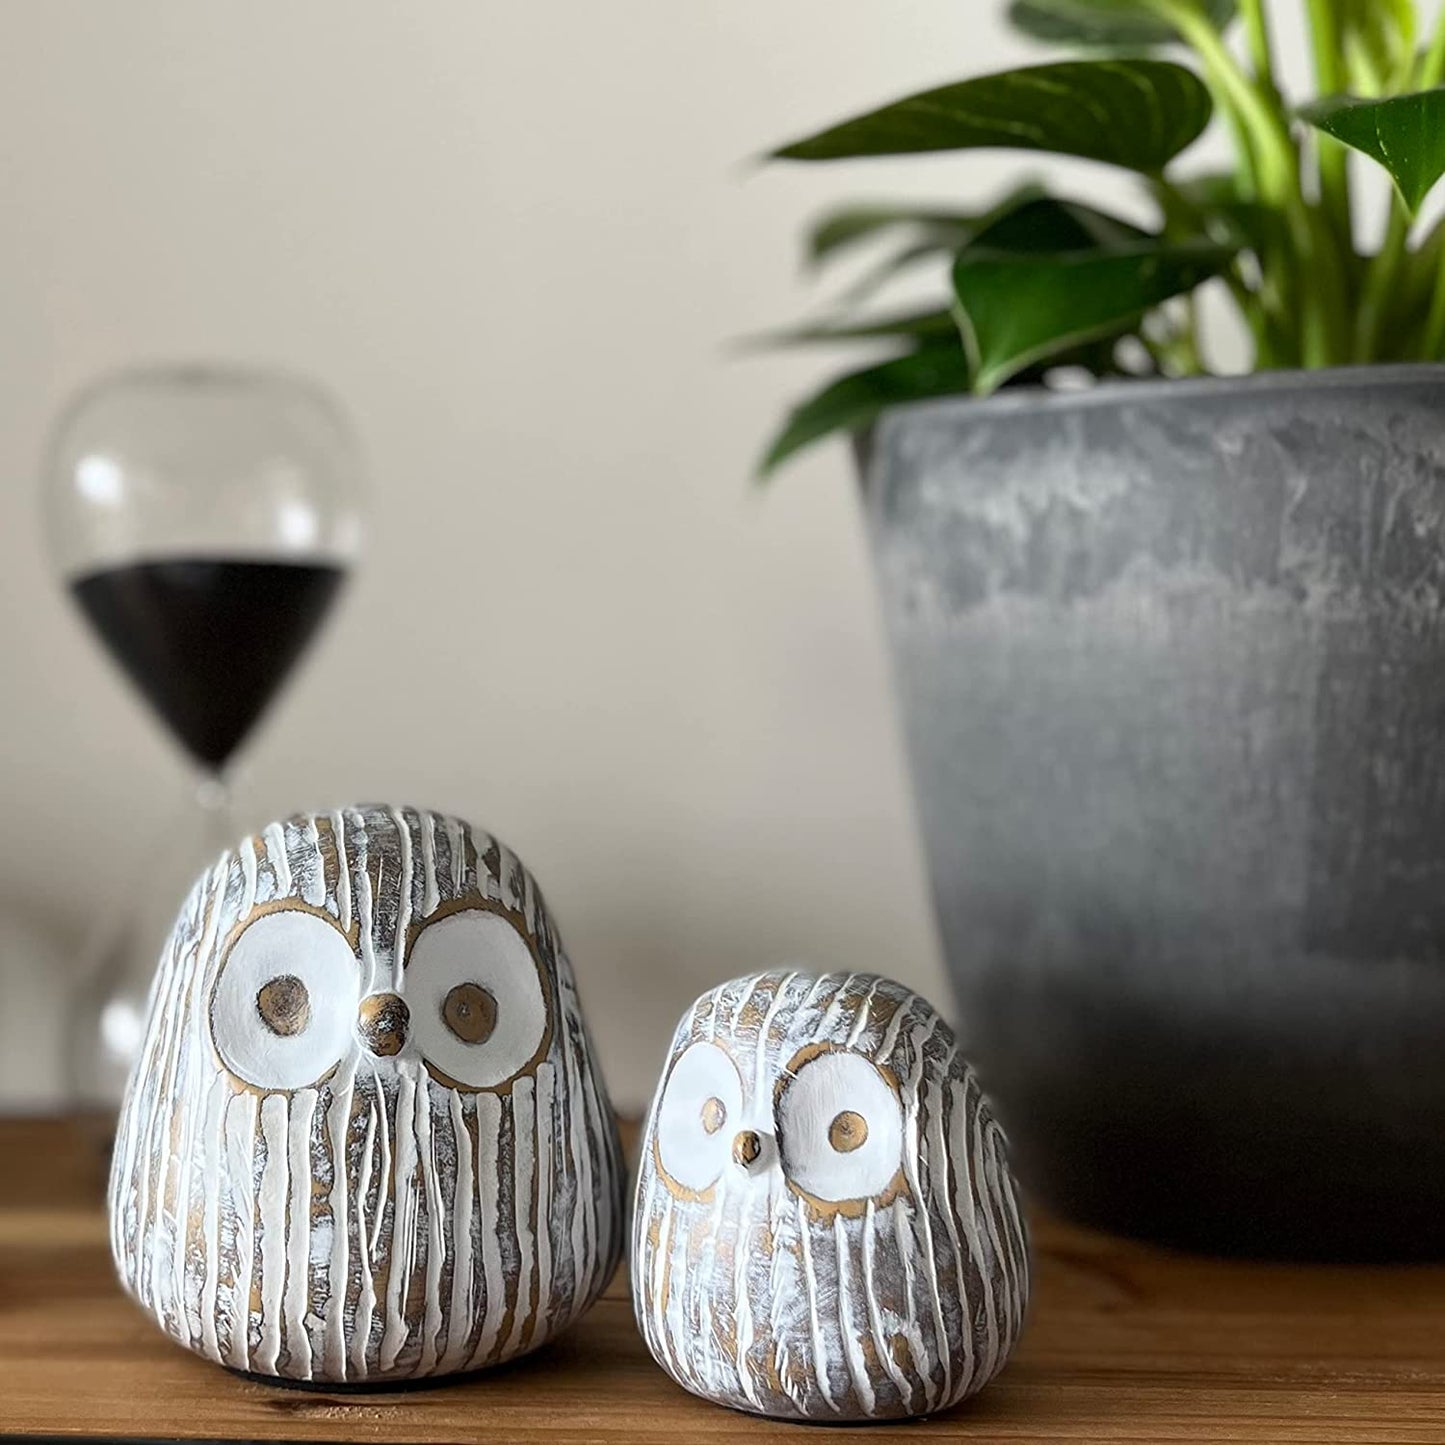 Chubby Night Owl Decor Statue Sculpture, Bookshelf Decor Accents, Boxed Set of 2 Rustic Brown & White (3⅛ & 4⅓ inches) Decorative Resin Figurines